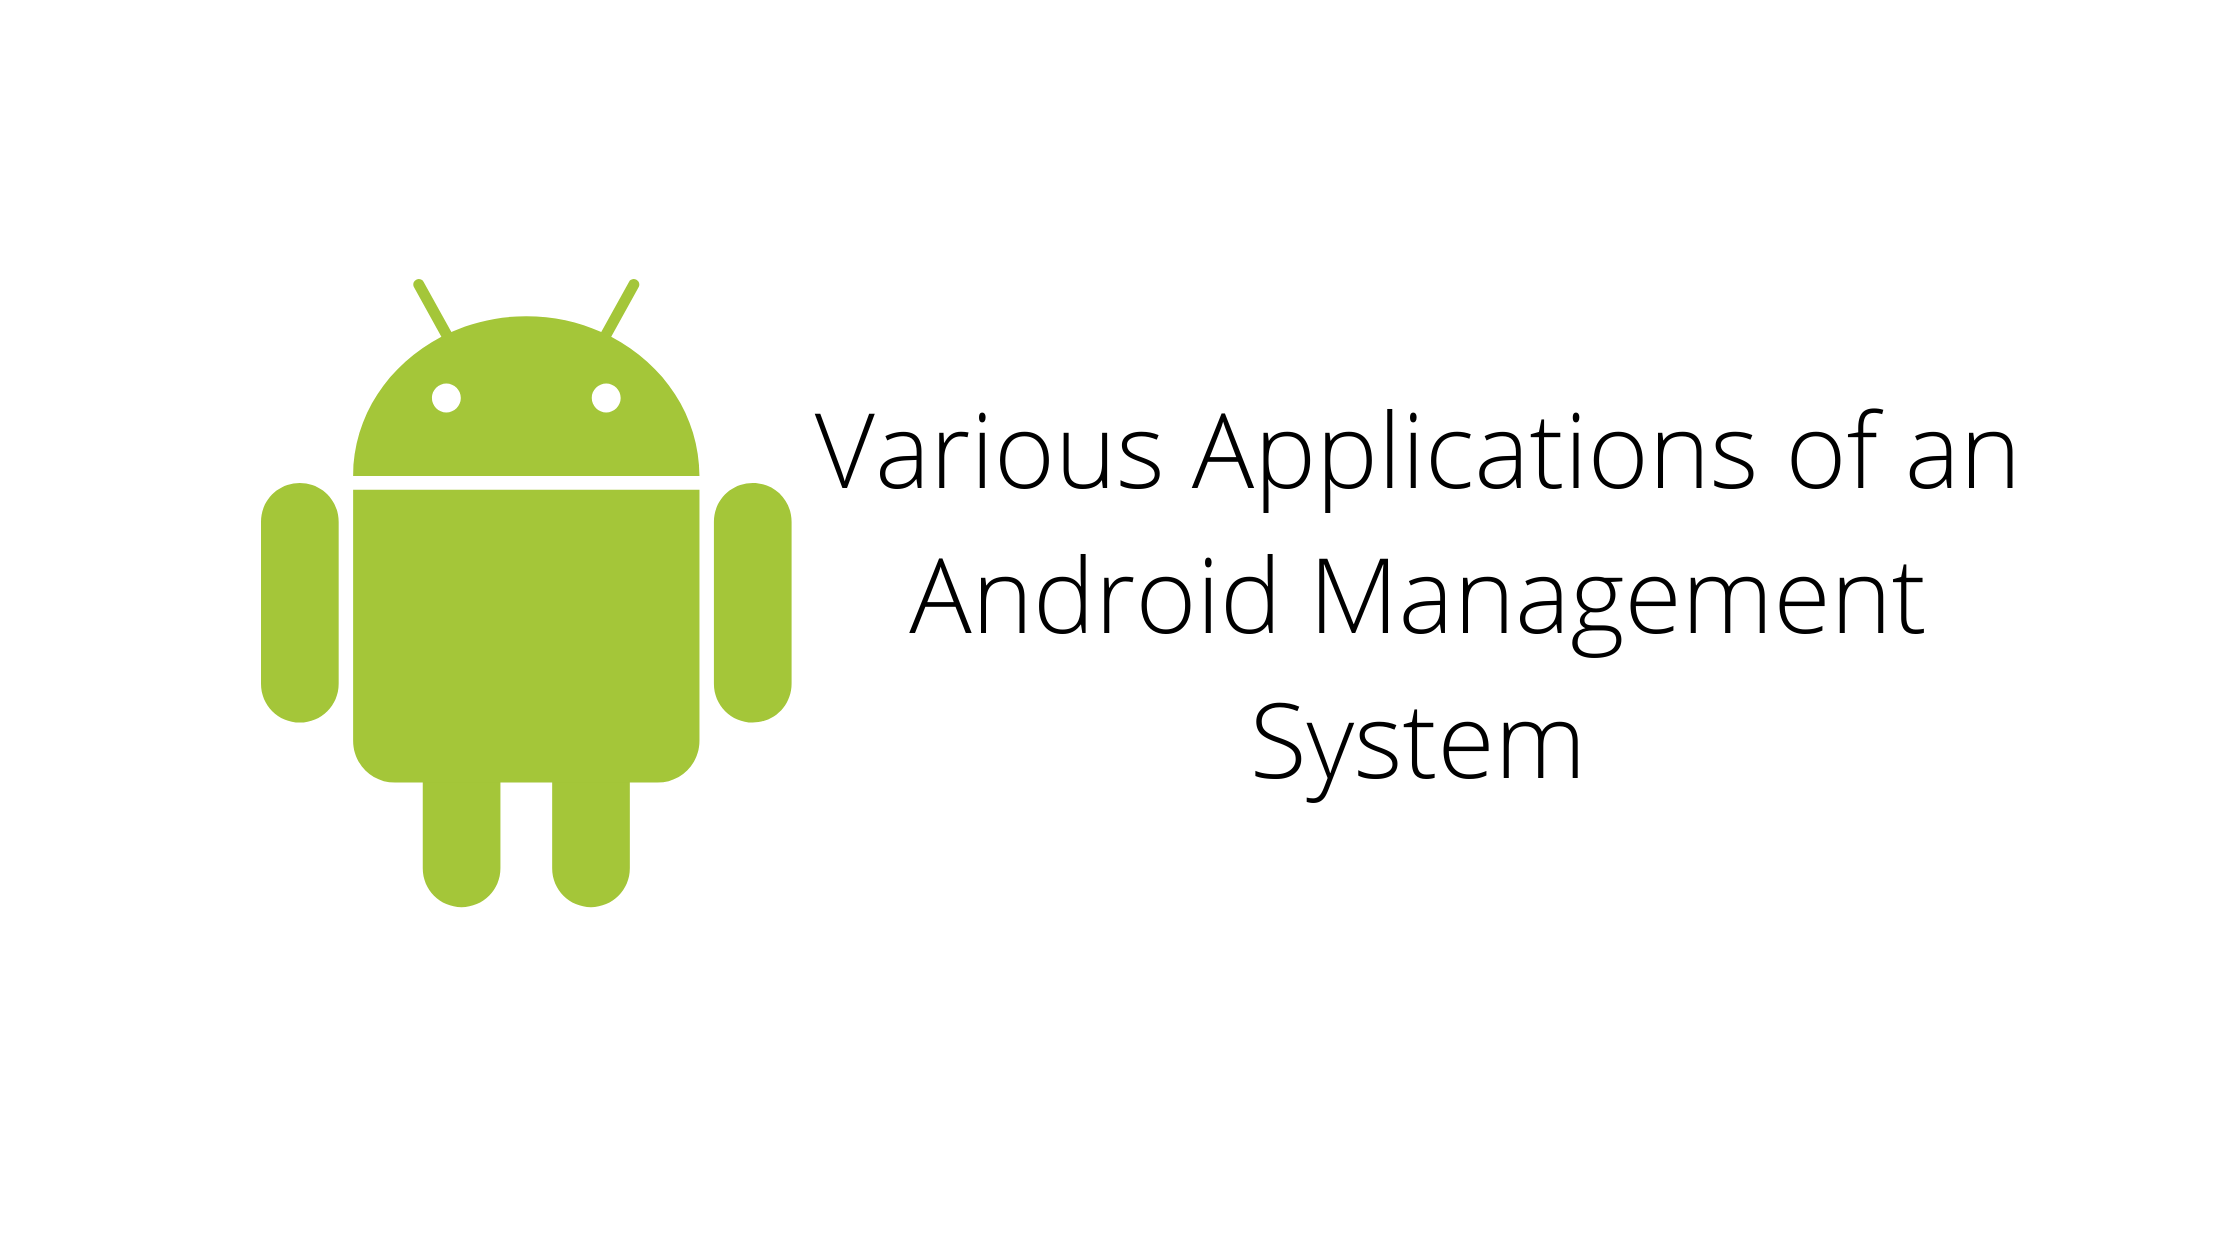 Various Applications of an Android Management System